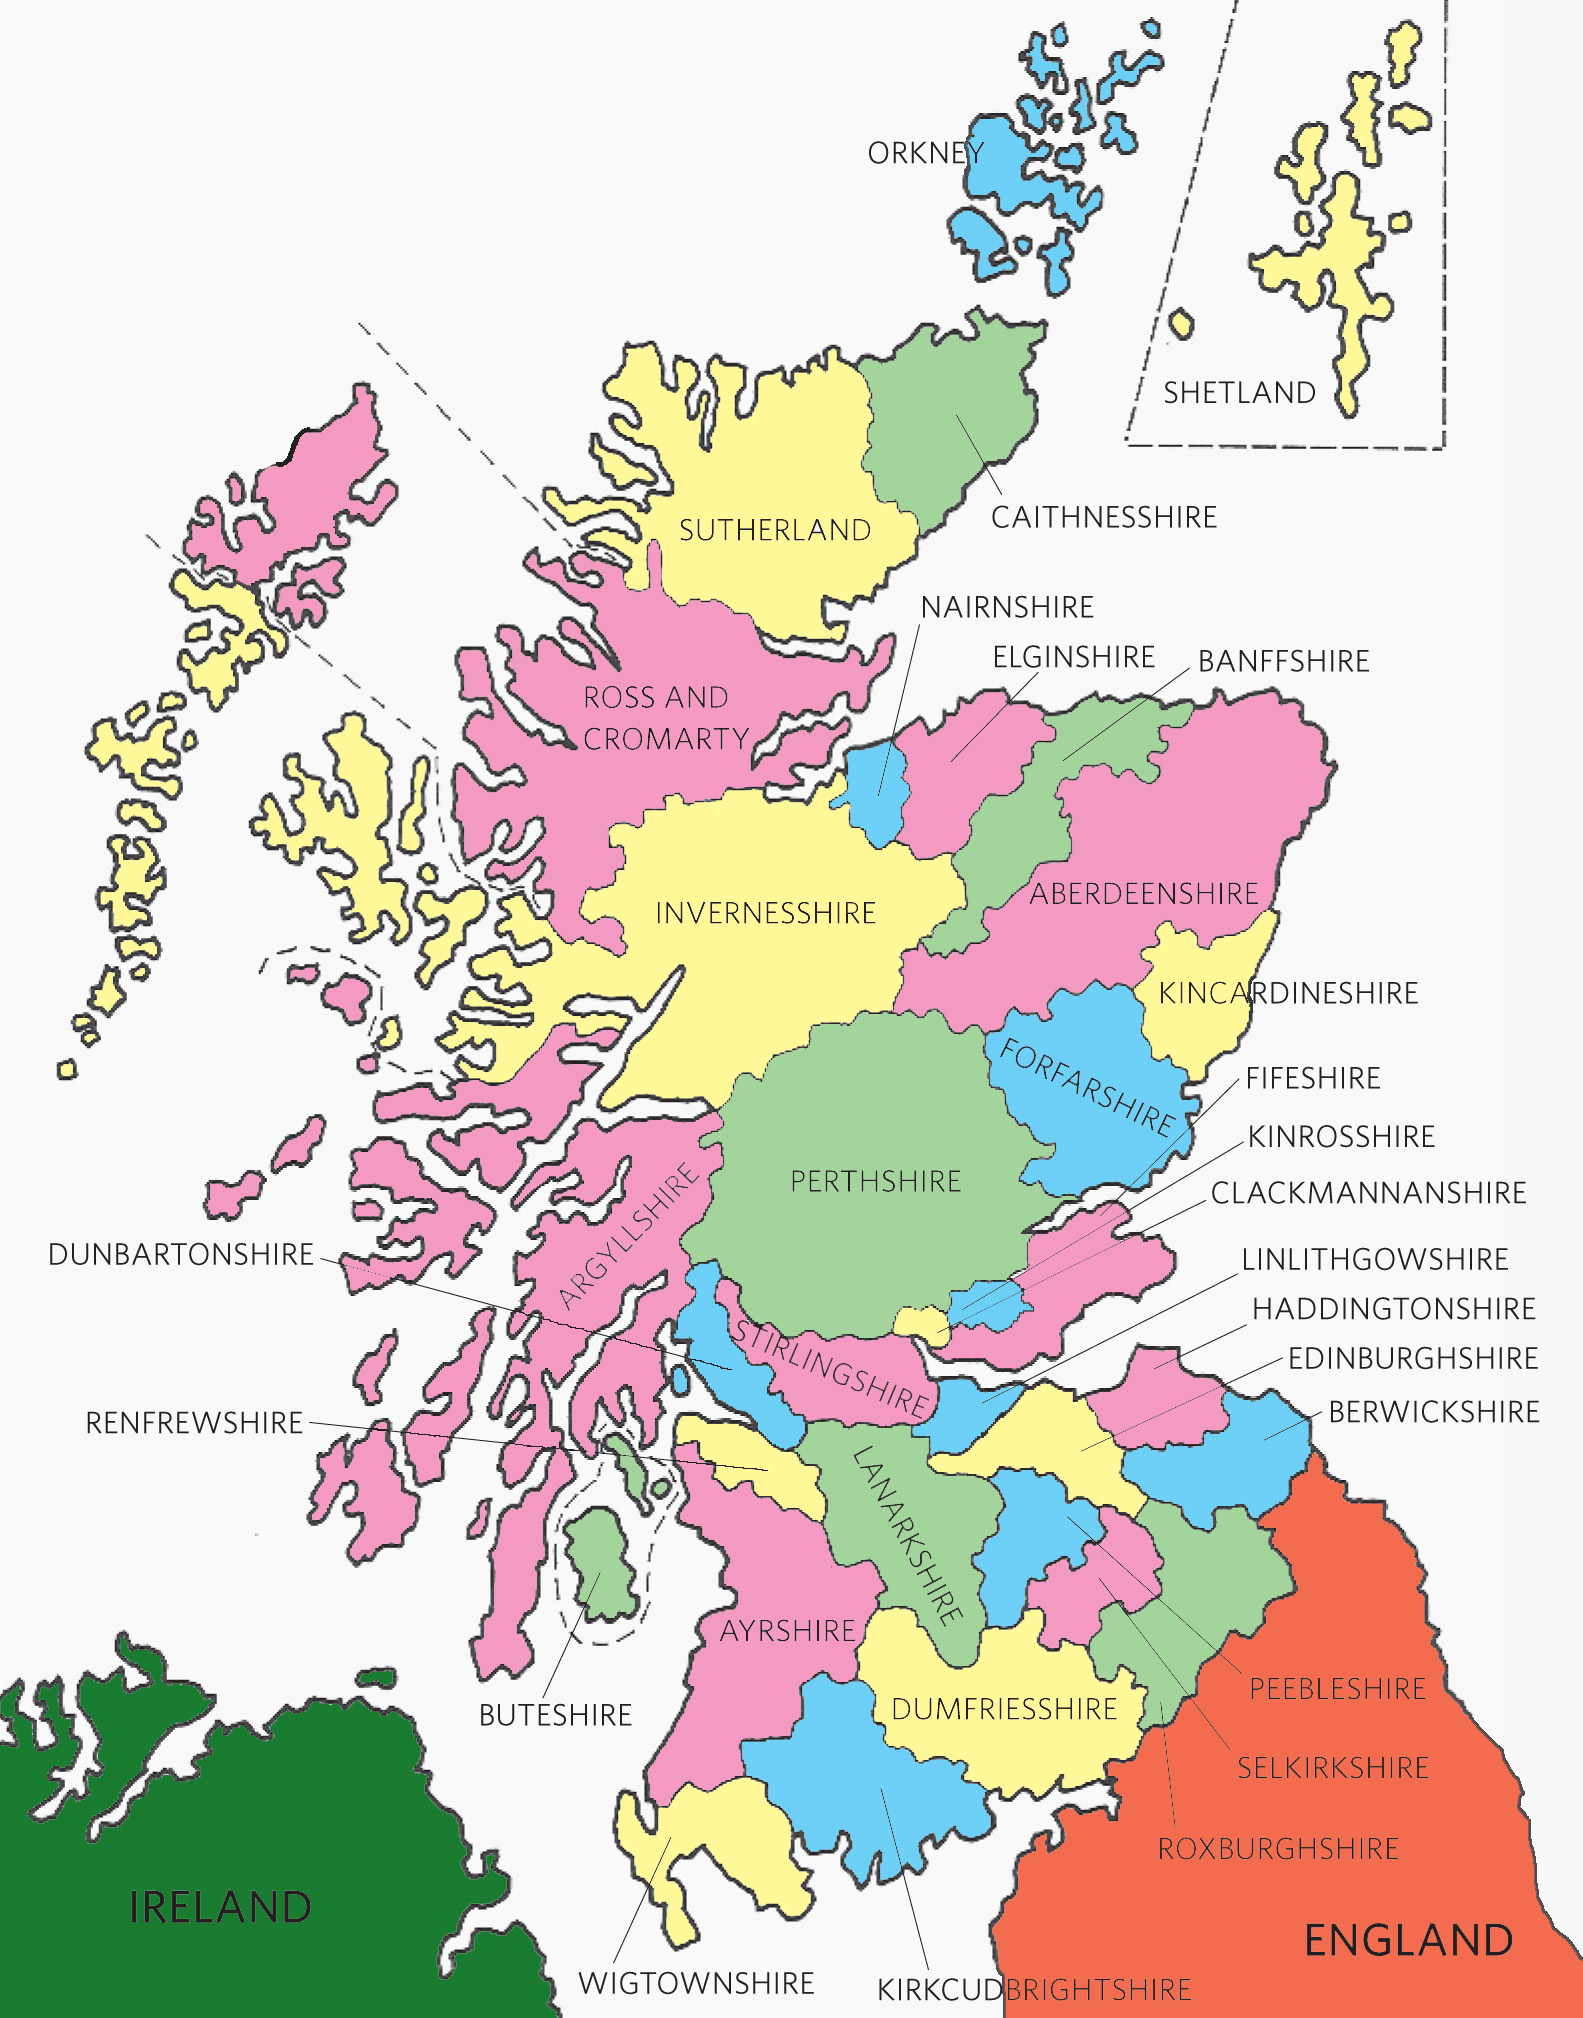 This Scottish counties map will help you find records of your Scottish ancestors.